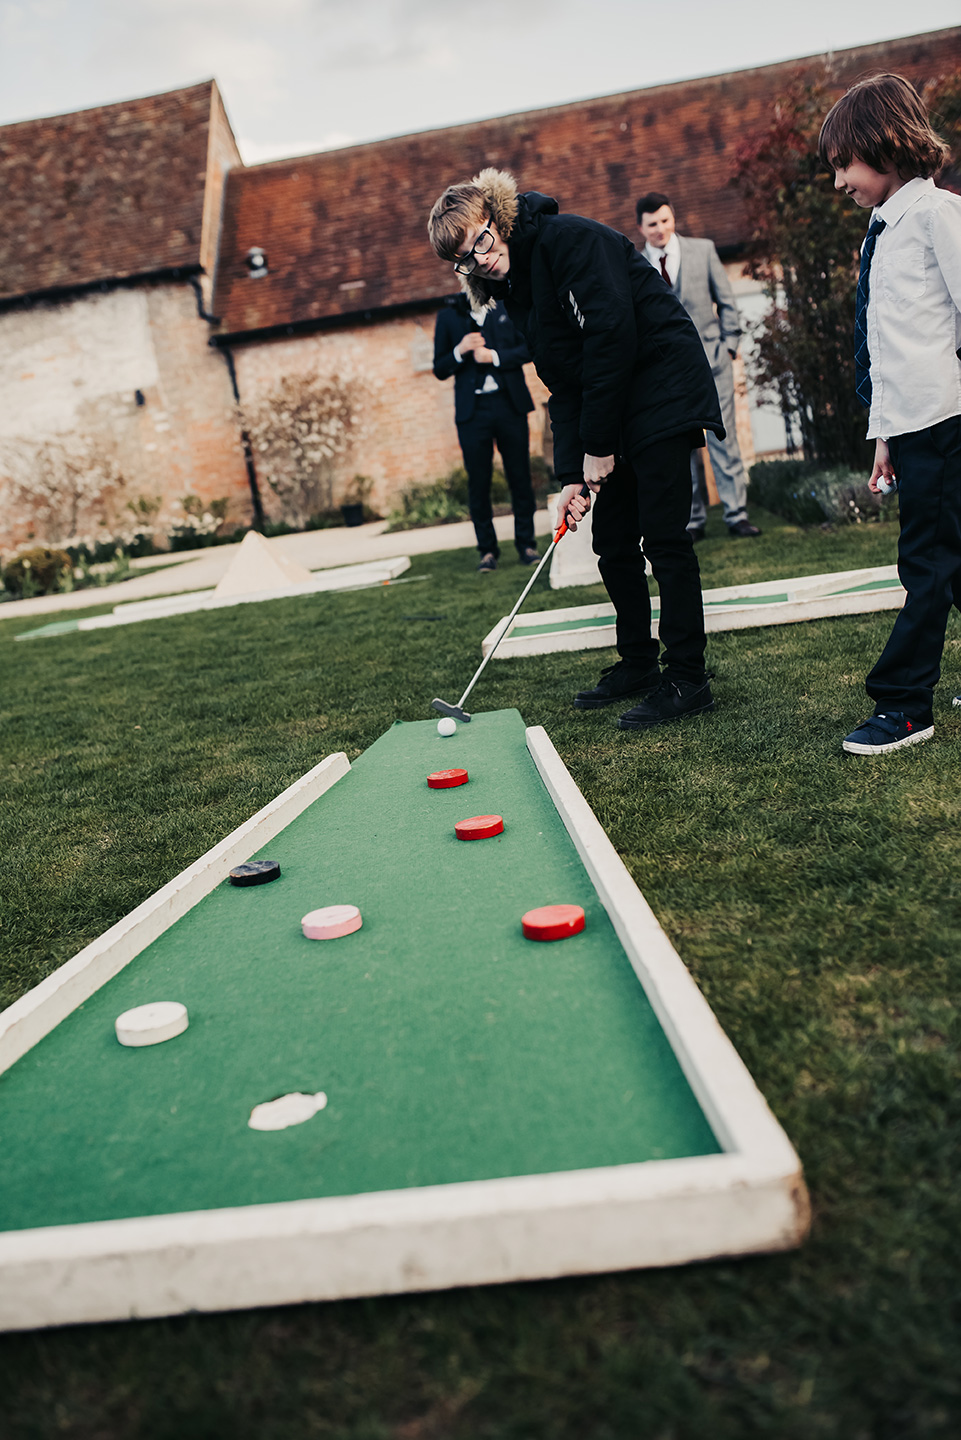 Guests were entertained with crazy golf outside in the gardens